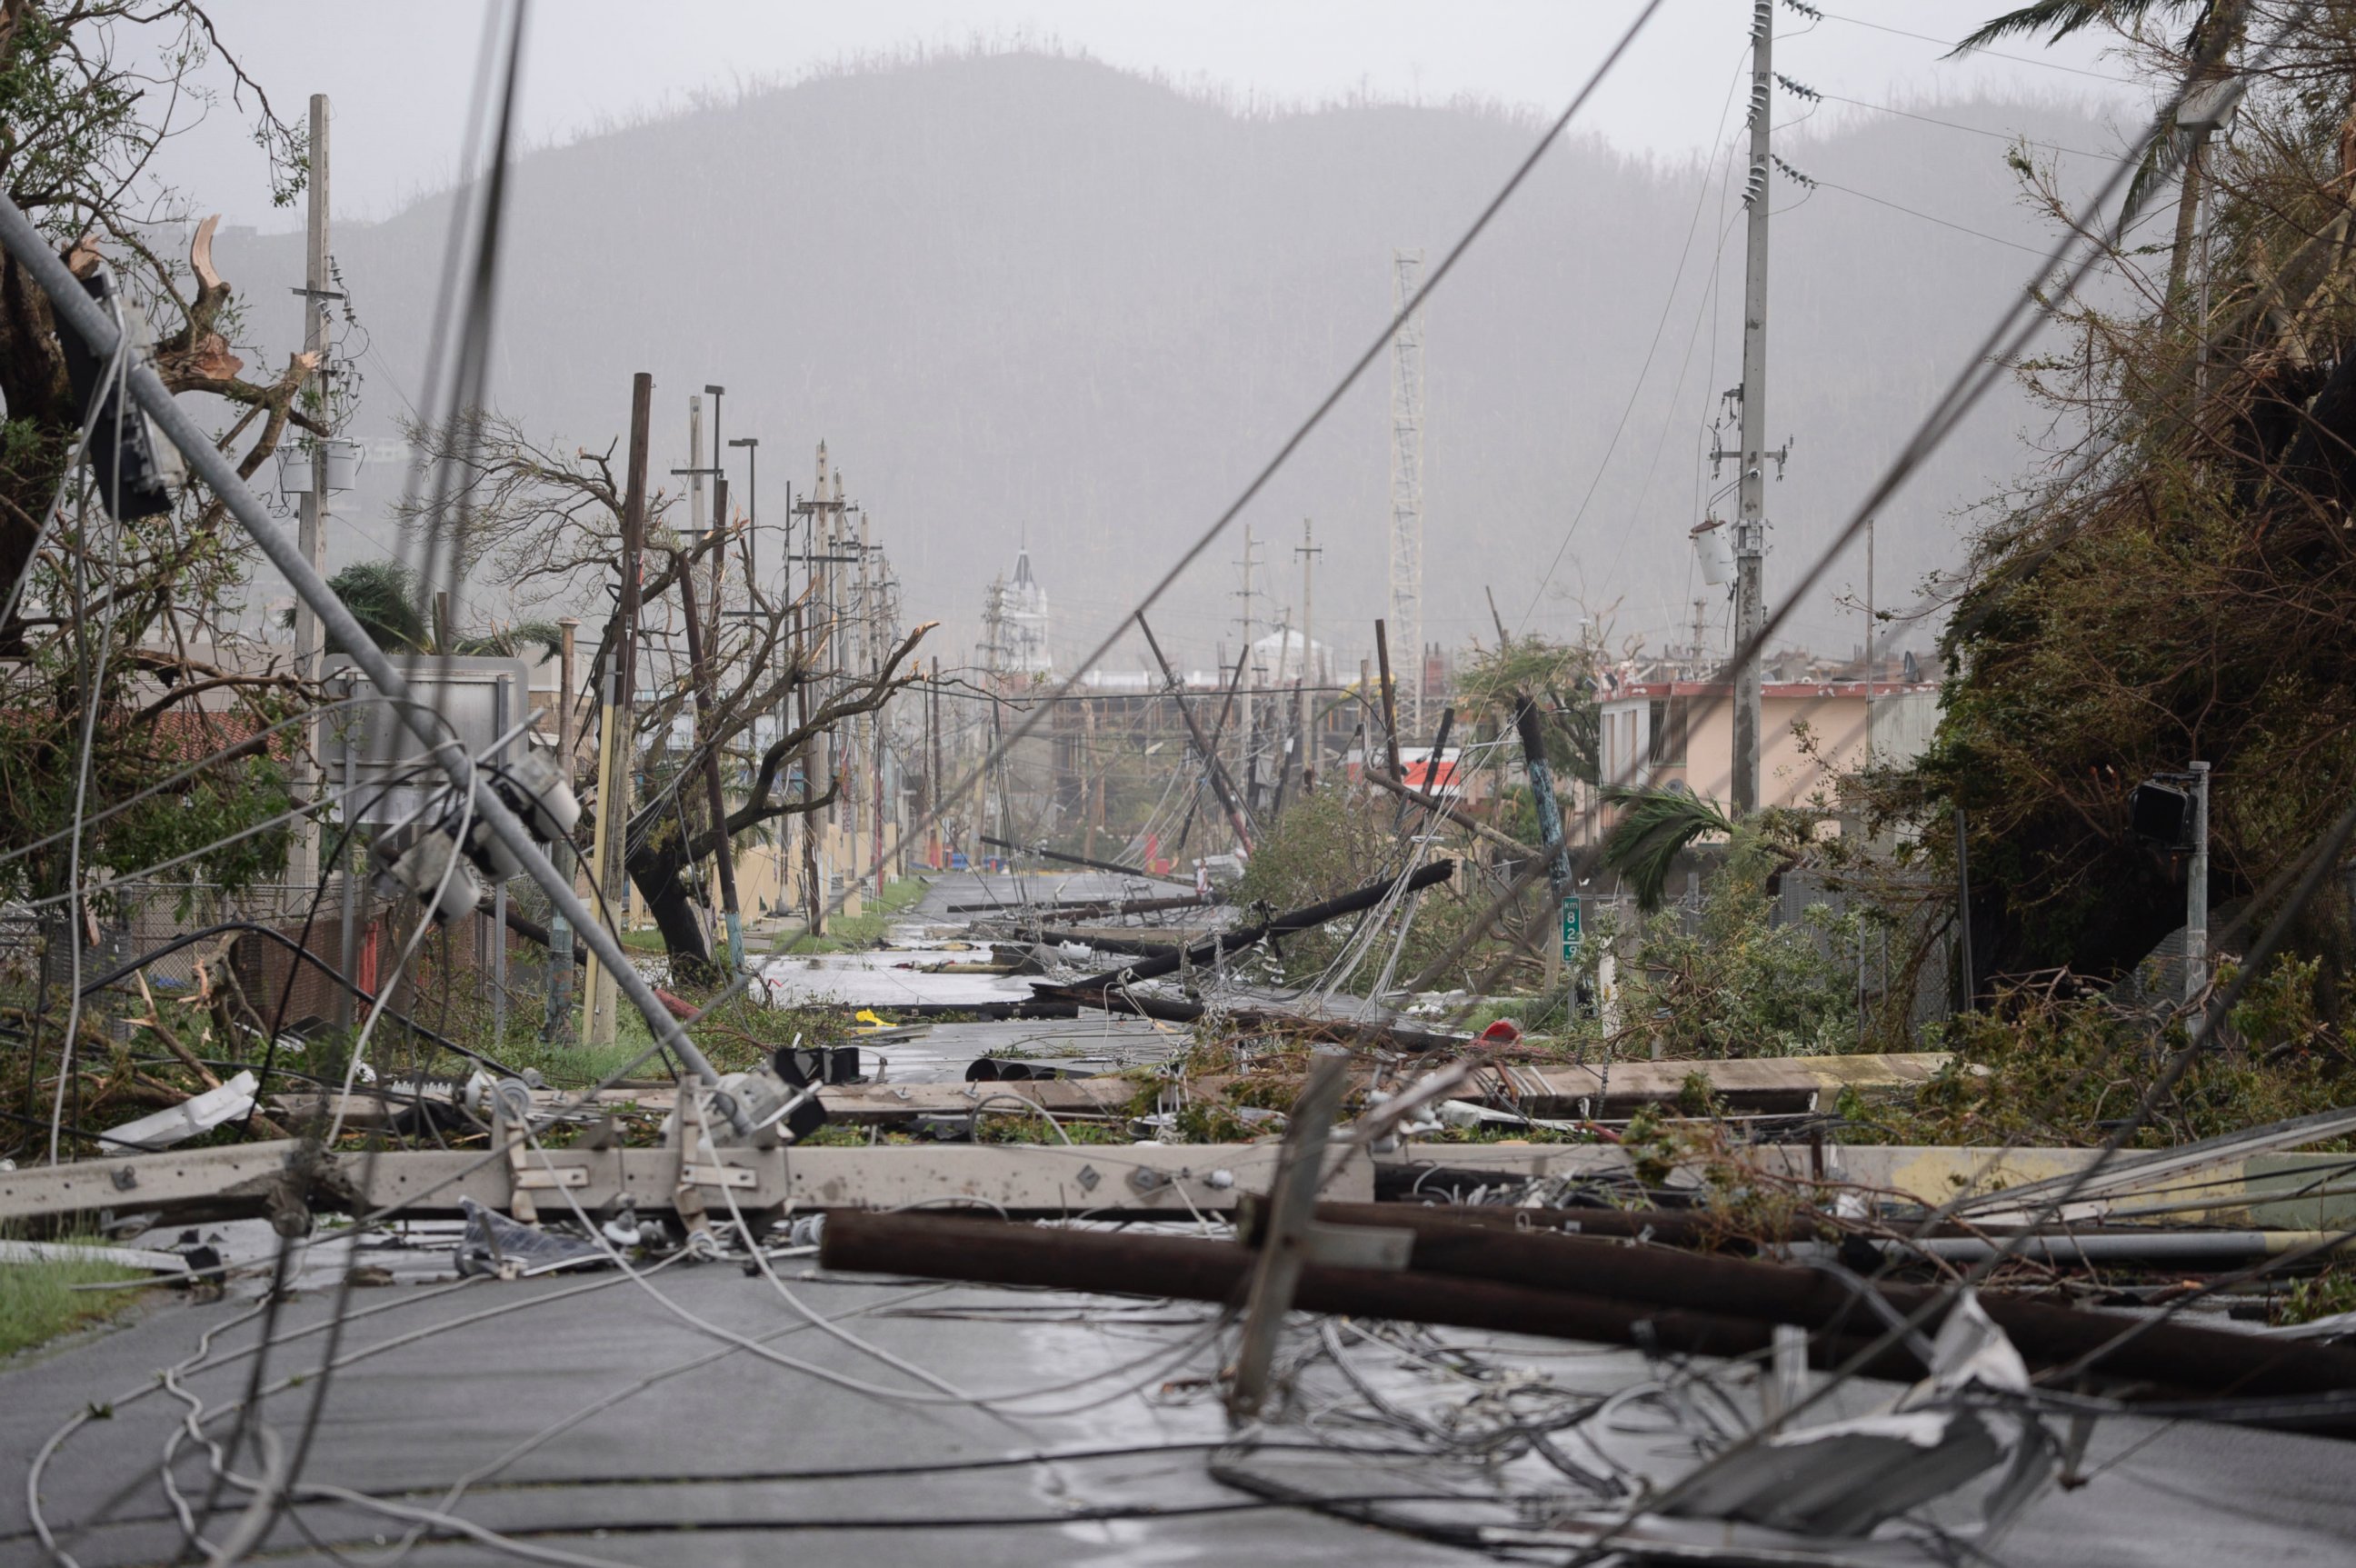 In this Sept. 20, 2017 file photo, electricity poles and lines lie toppled on the road after Hurricane Maria hit the eastern region of the island, in Humacao, Puerto Rico.